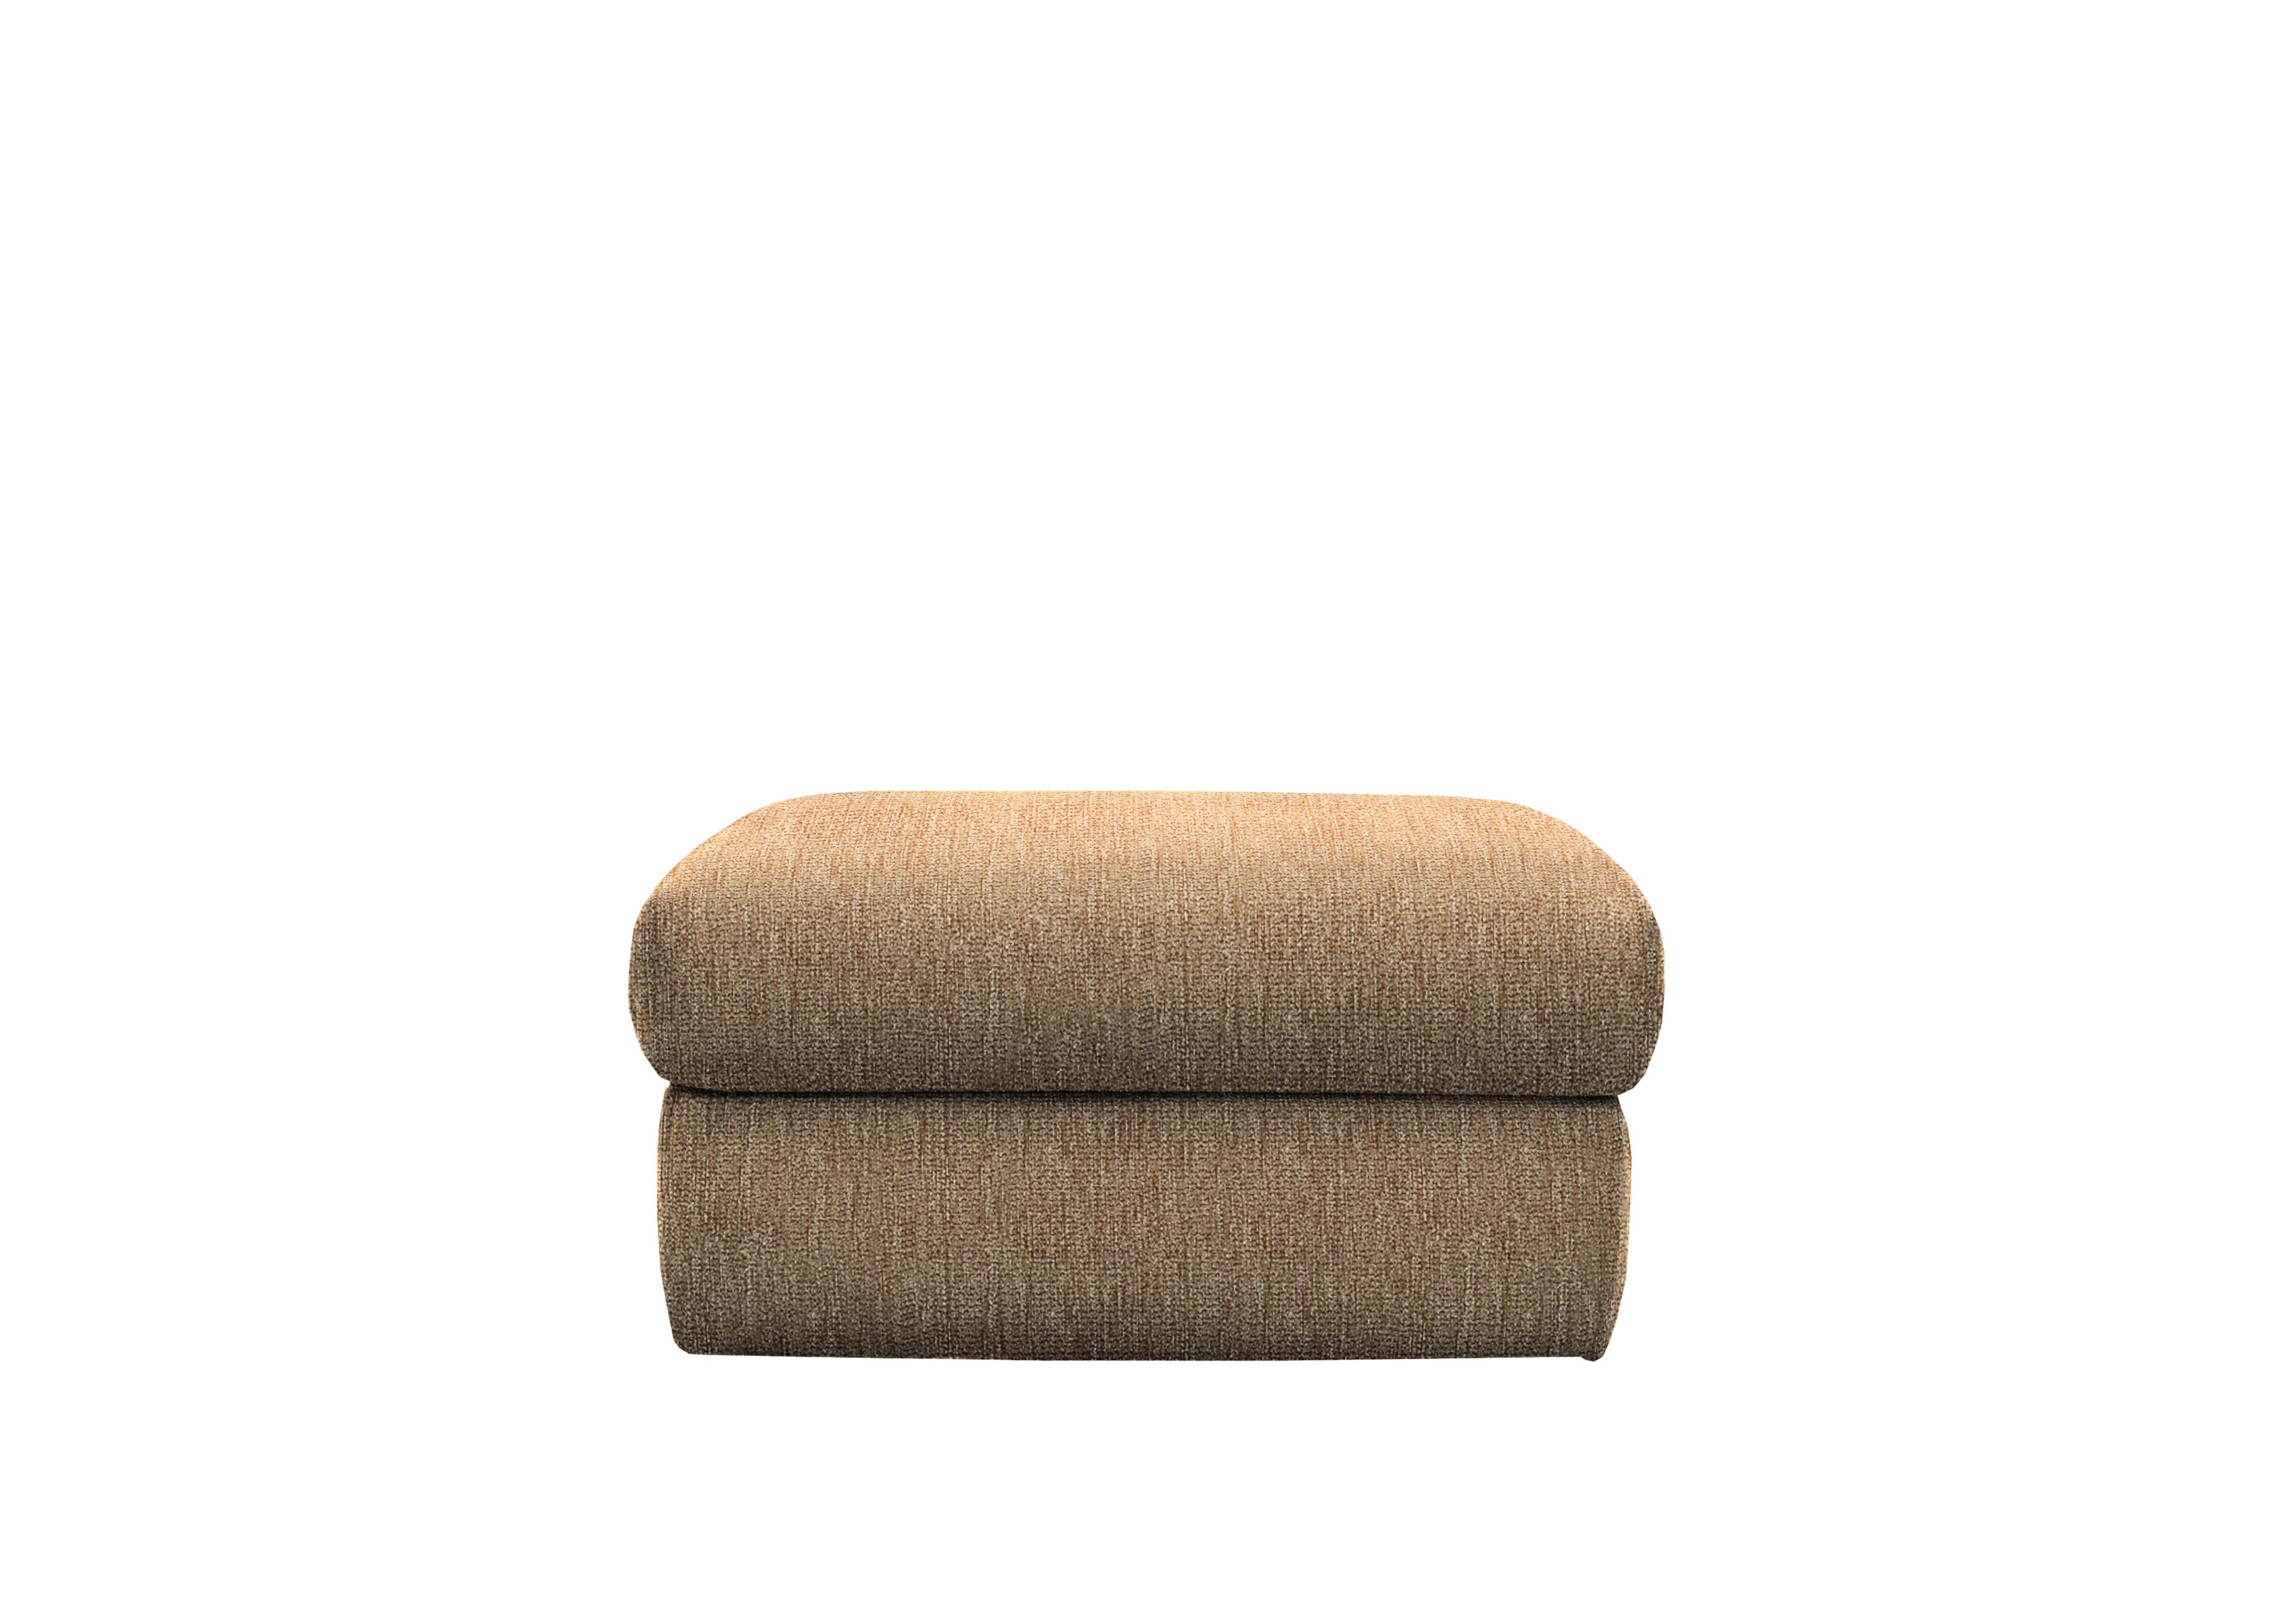 Kingsbury Fabric Storage Footstool in A070 Boucle Cocoa on Furniture Village